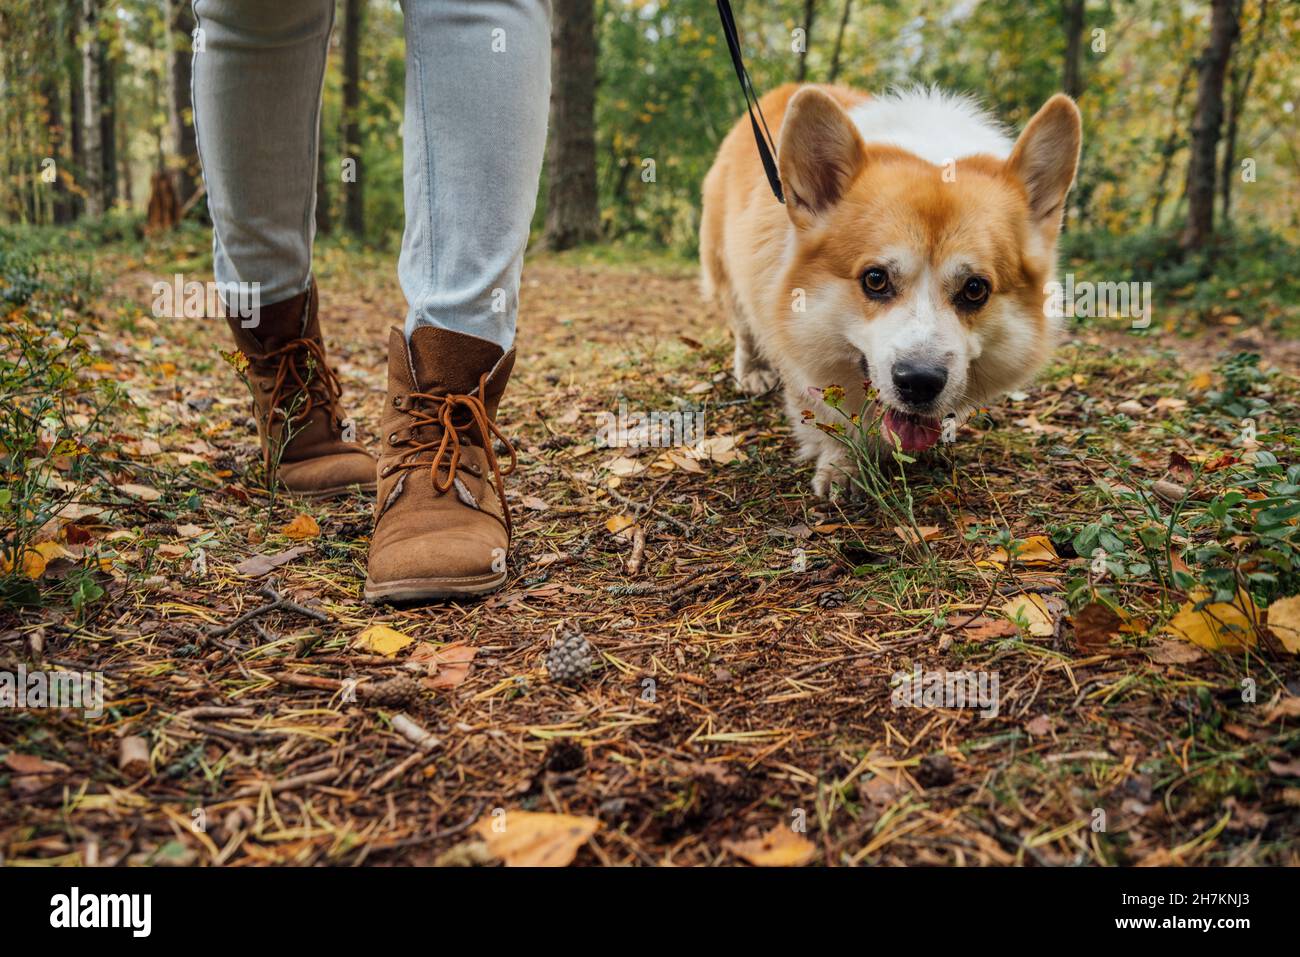 Woman walking with dog in forest Stock Photo